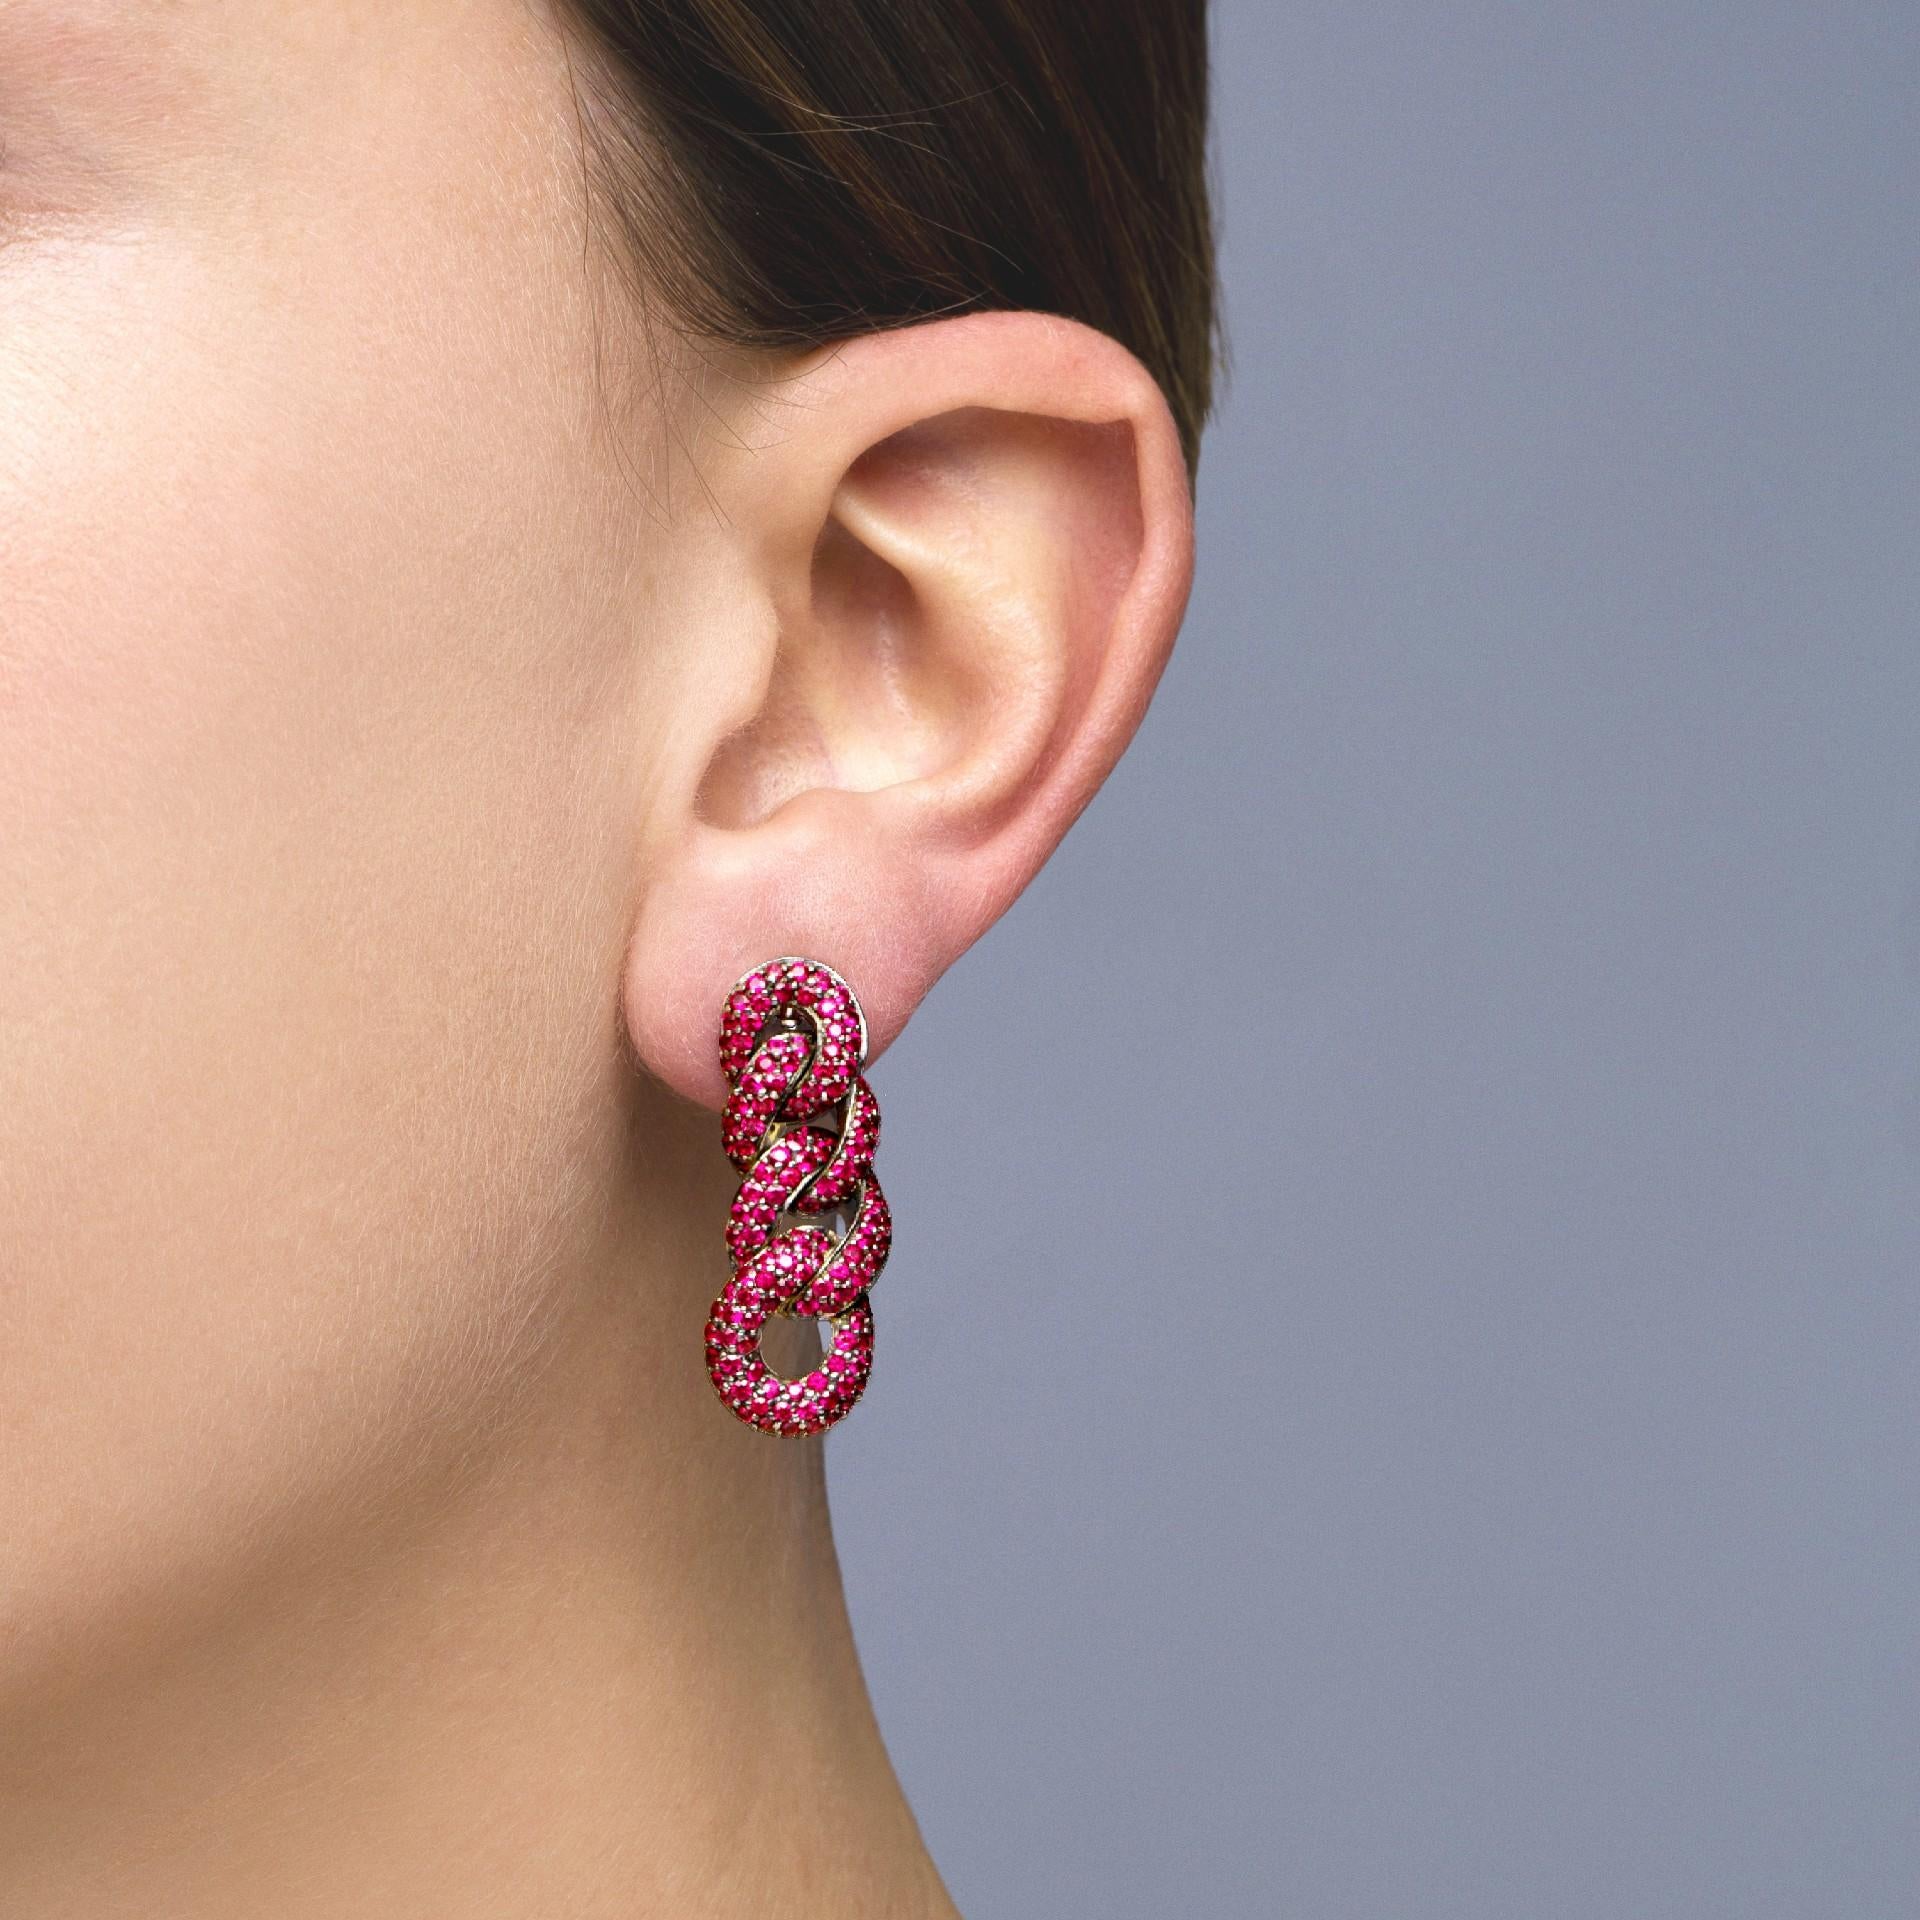 Alex Jona design collection, hand crafted in Italy, 18k white gold curb link chain clip earrings set with 4.58 carats of rubies with black rhodium setting. 
Dimensions: L 1.32in/33.48mm, W 0.49in/12.59mm, D 0.21in/5mm.

Alex Jona jewels stand out,